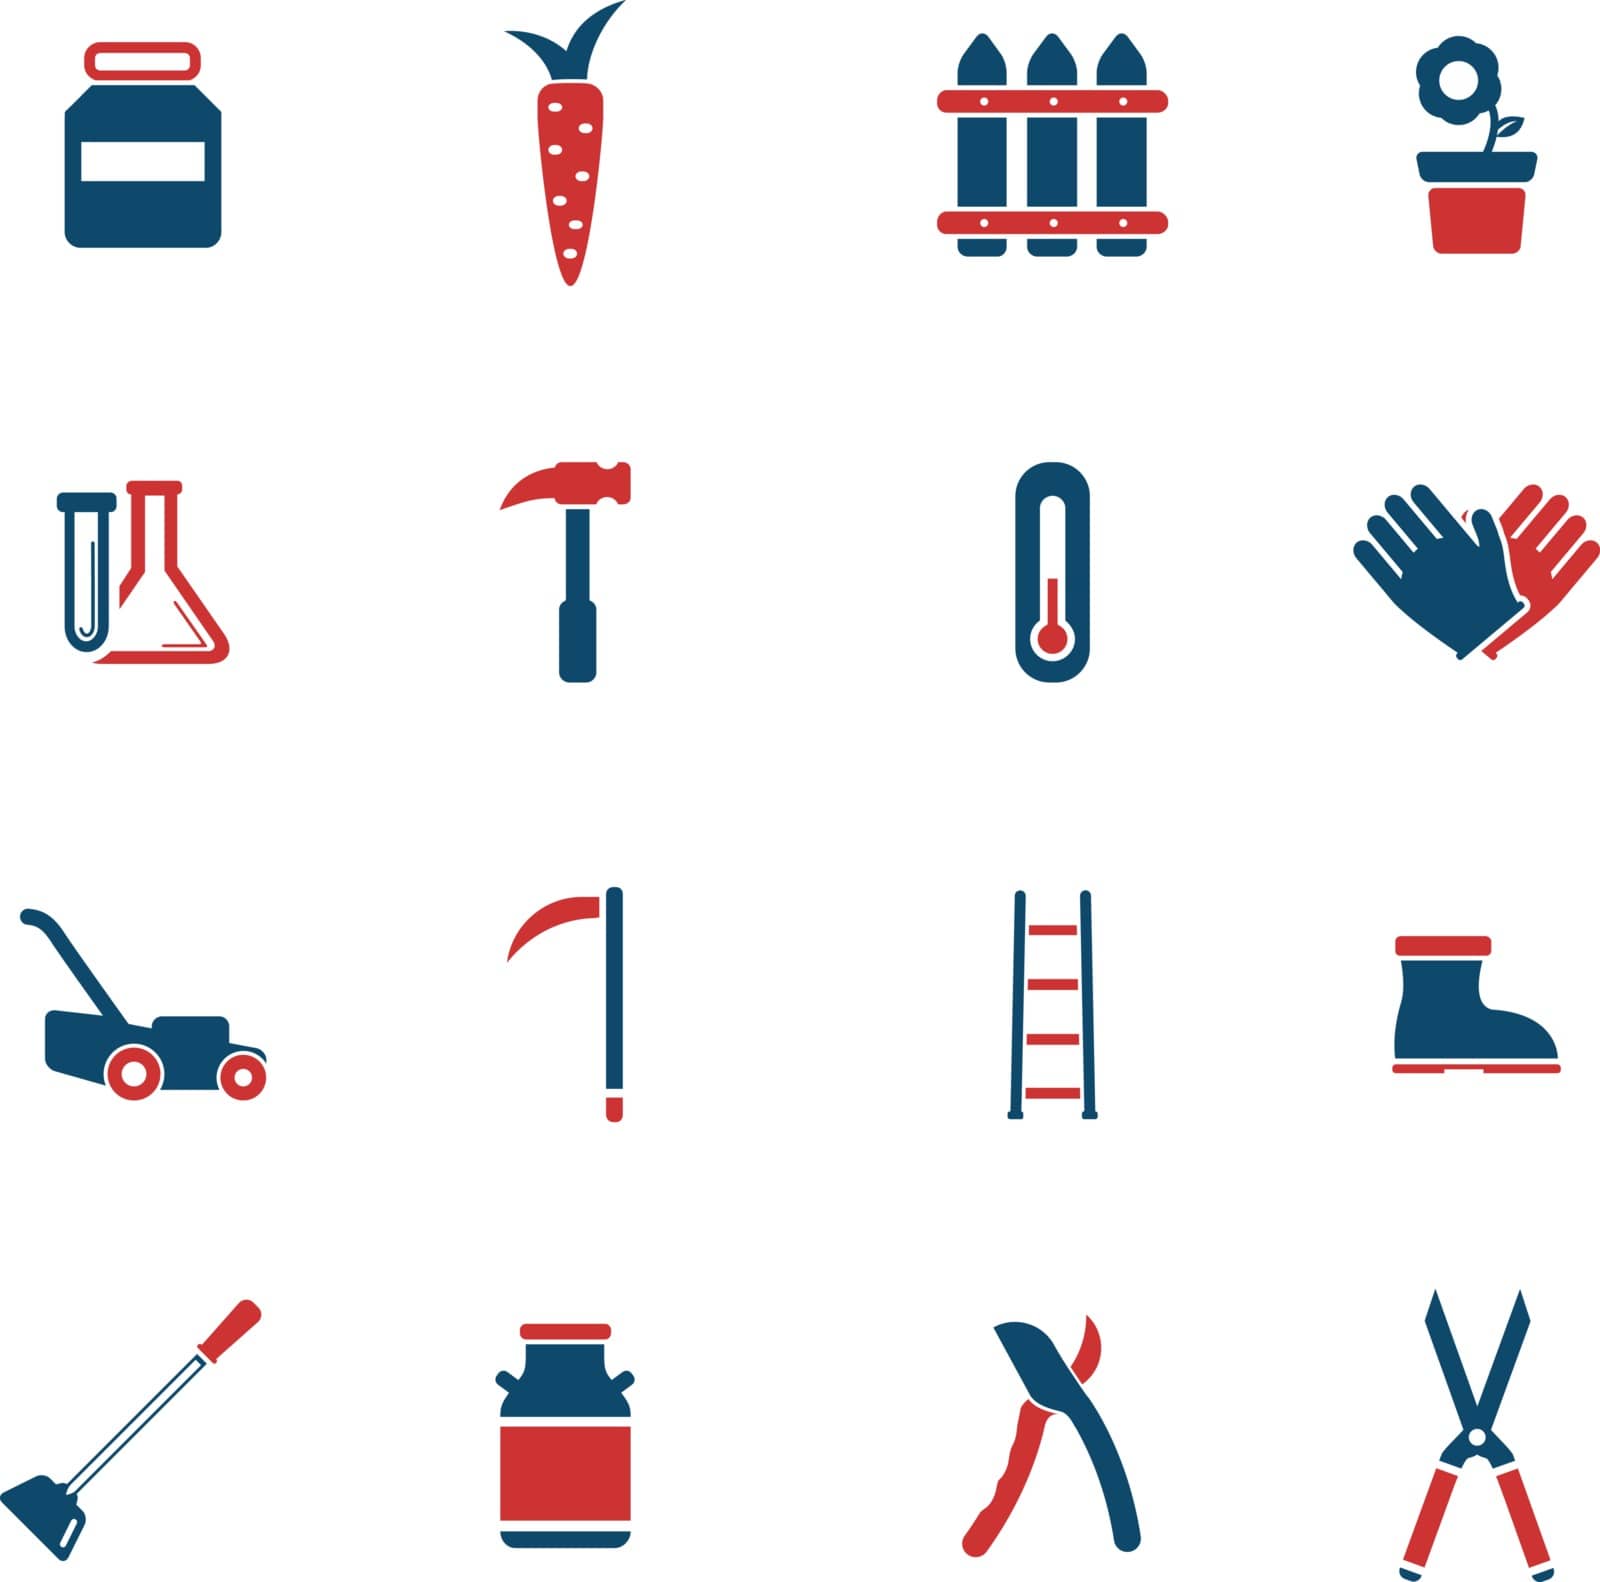 Garden tools simply symbol for web icons